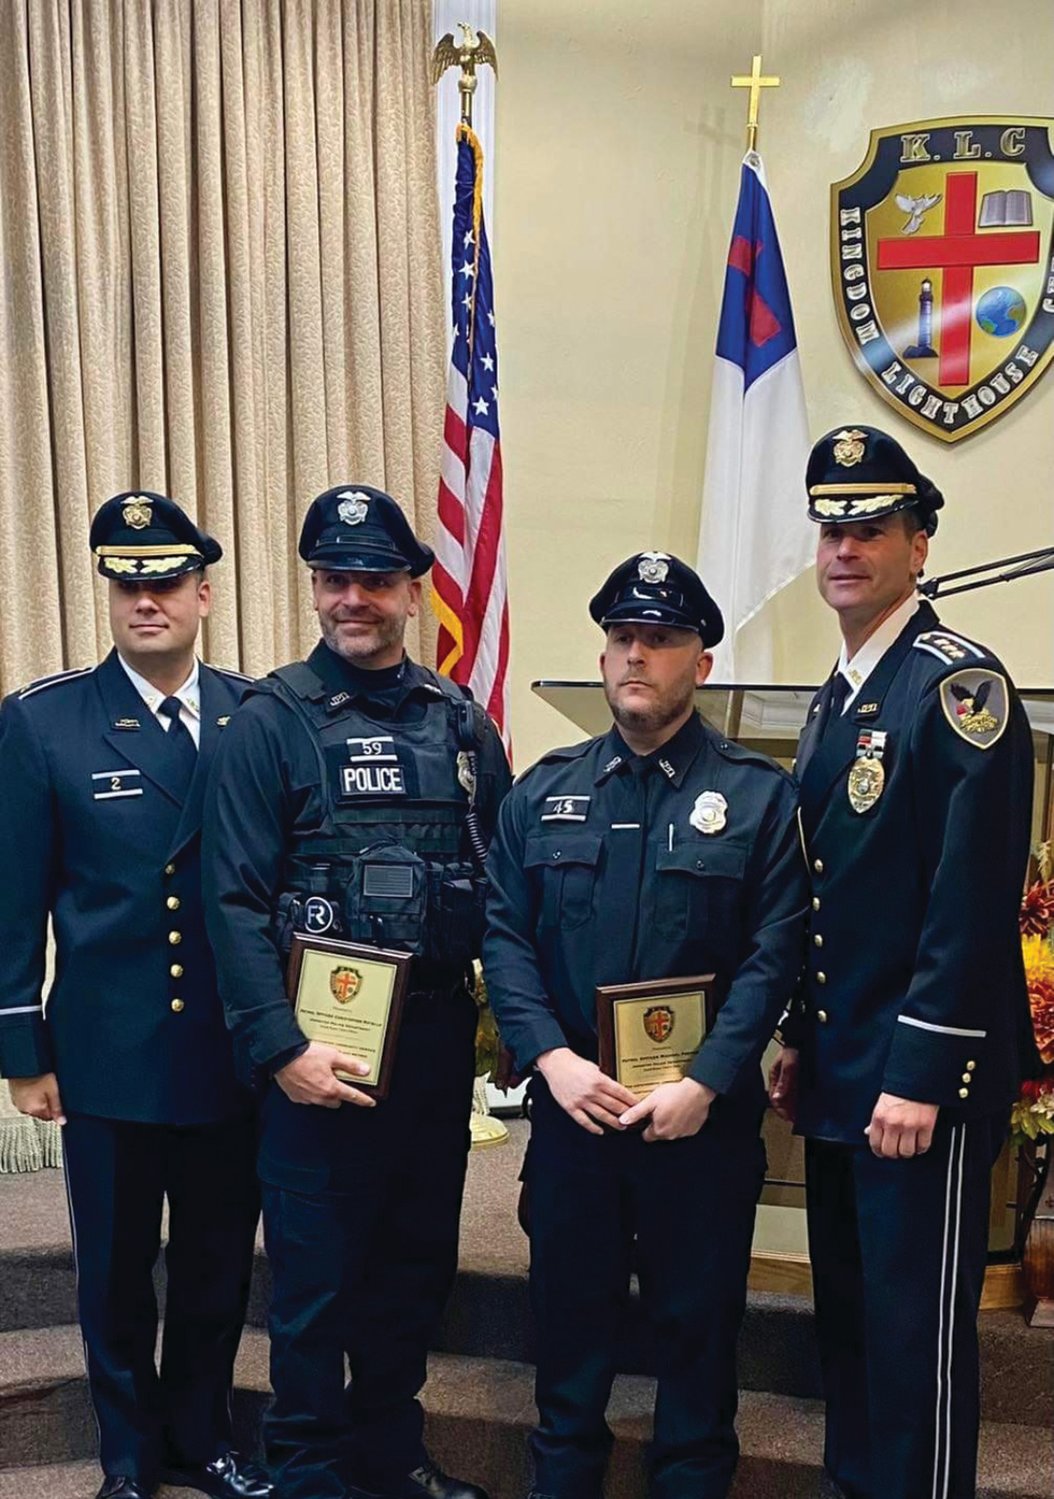 DUTY PERFORMED, ABOVE AND BEYOND: Johnston Police Patrolmen Michael Protano and Christopher Rotella were honored recently  and formally recognized with Community Service Awards for performing above and beyond the call of duty during the recent arrest of a wanted suspect. Johnston police extended “thanks to Bishop Femi Owoyemi and the entire congregation of Kingdom Lighthouse Church, for hosting the ceremony and recognizing the outstanding commitment of both officers,” in a statement on the department’s Facebook page.